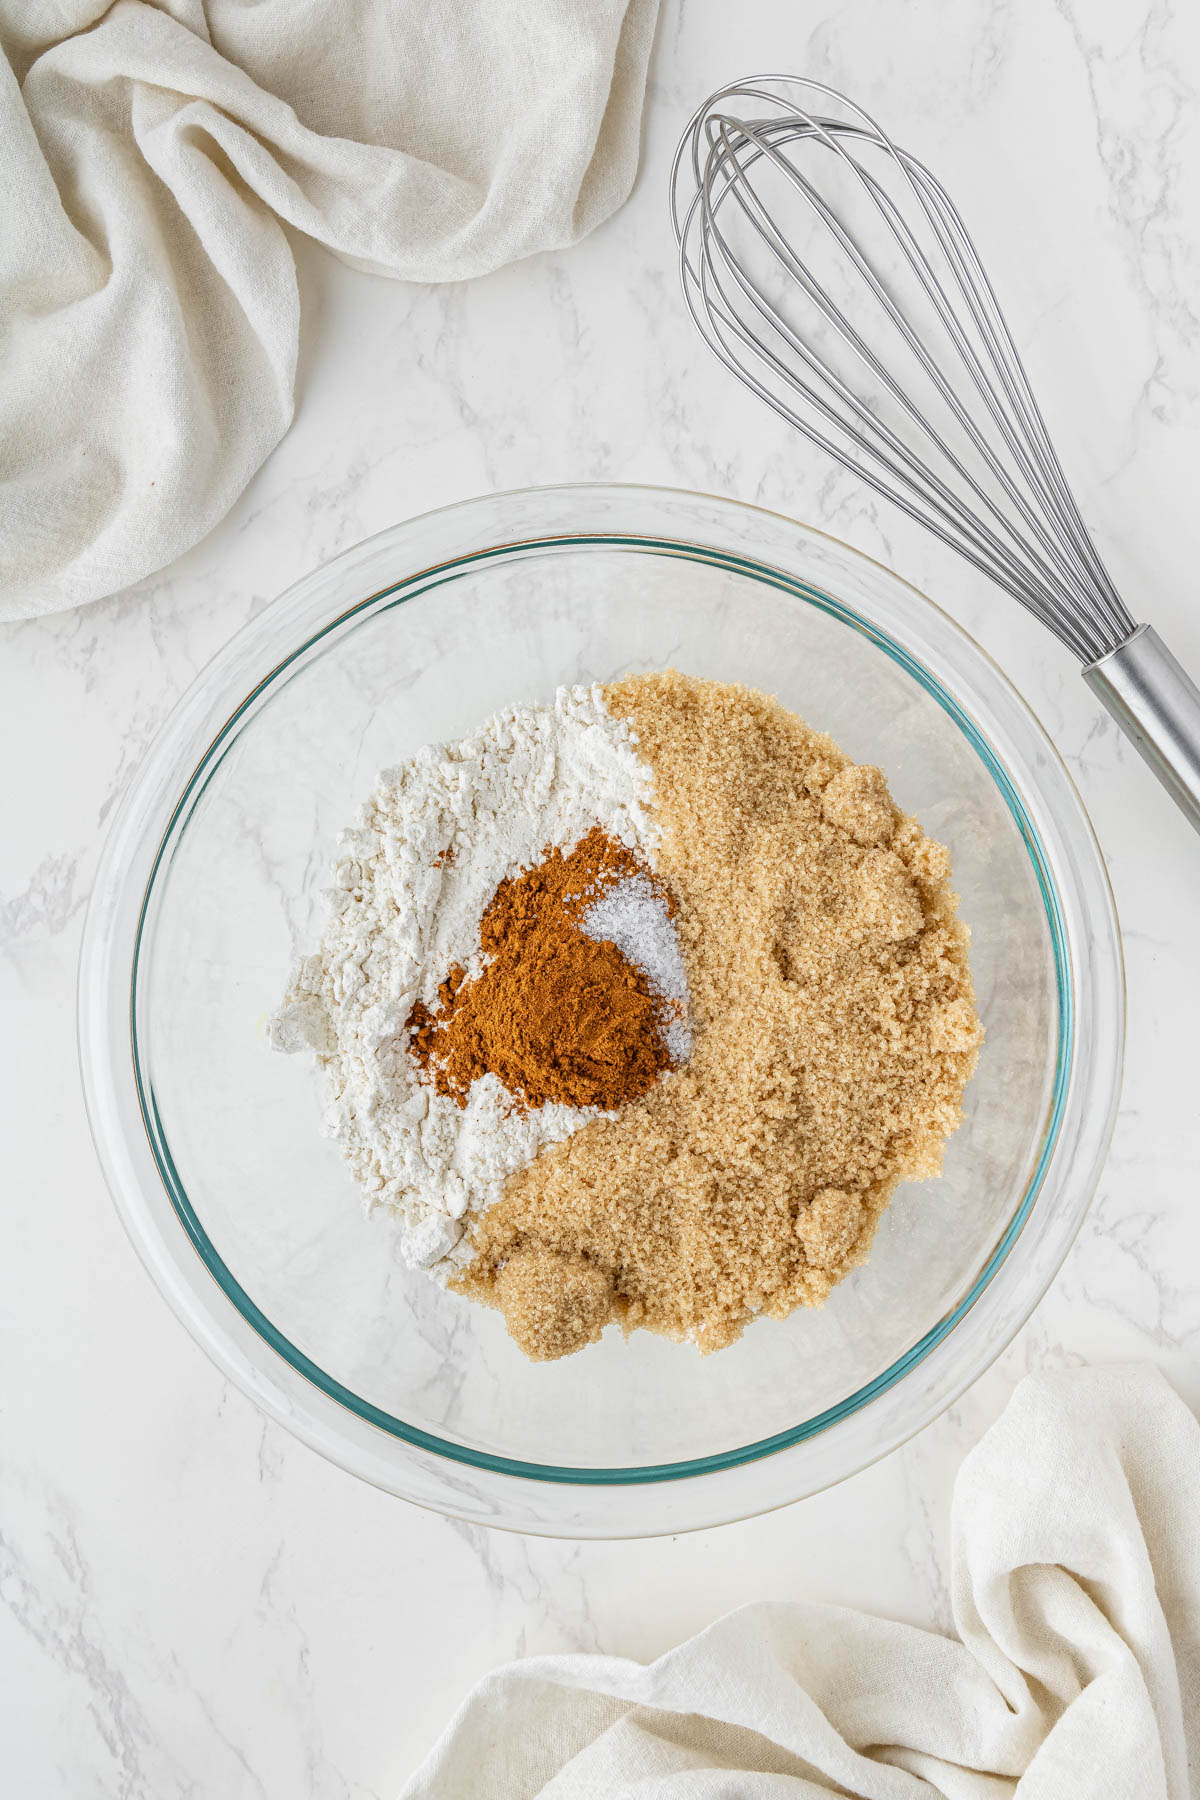 cinnamon streussel ingredients in a clear bowl with a whisk